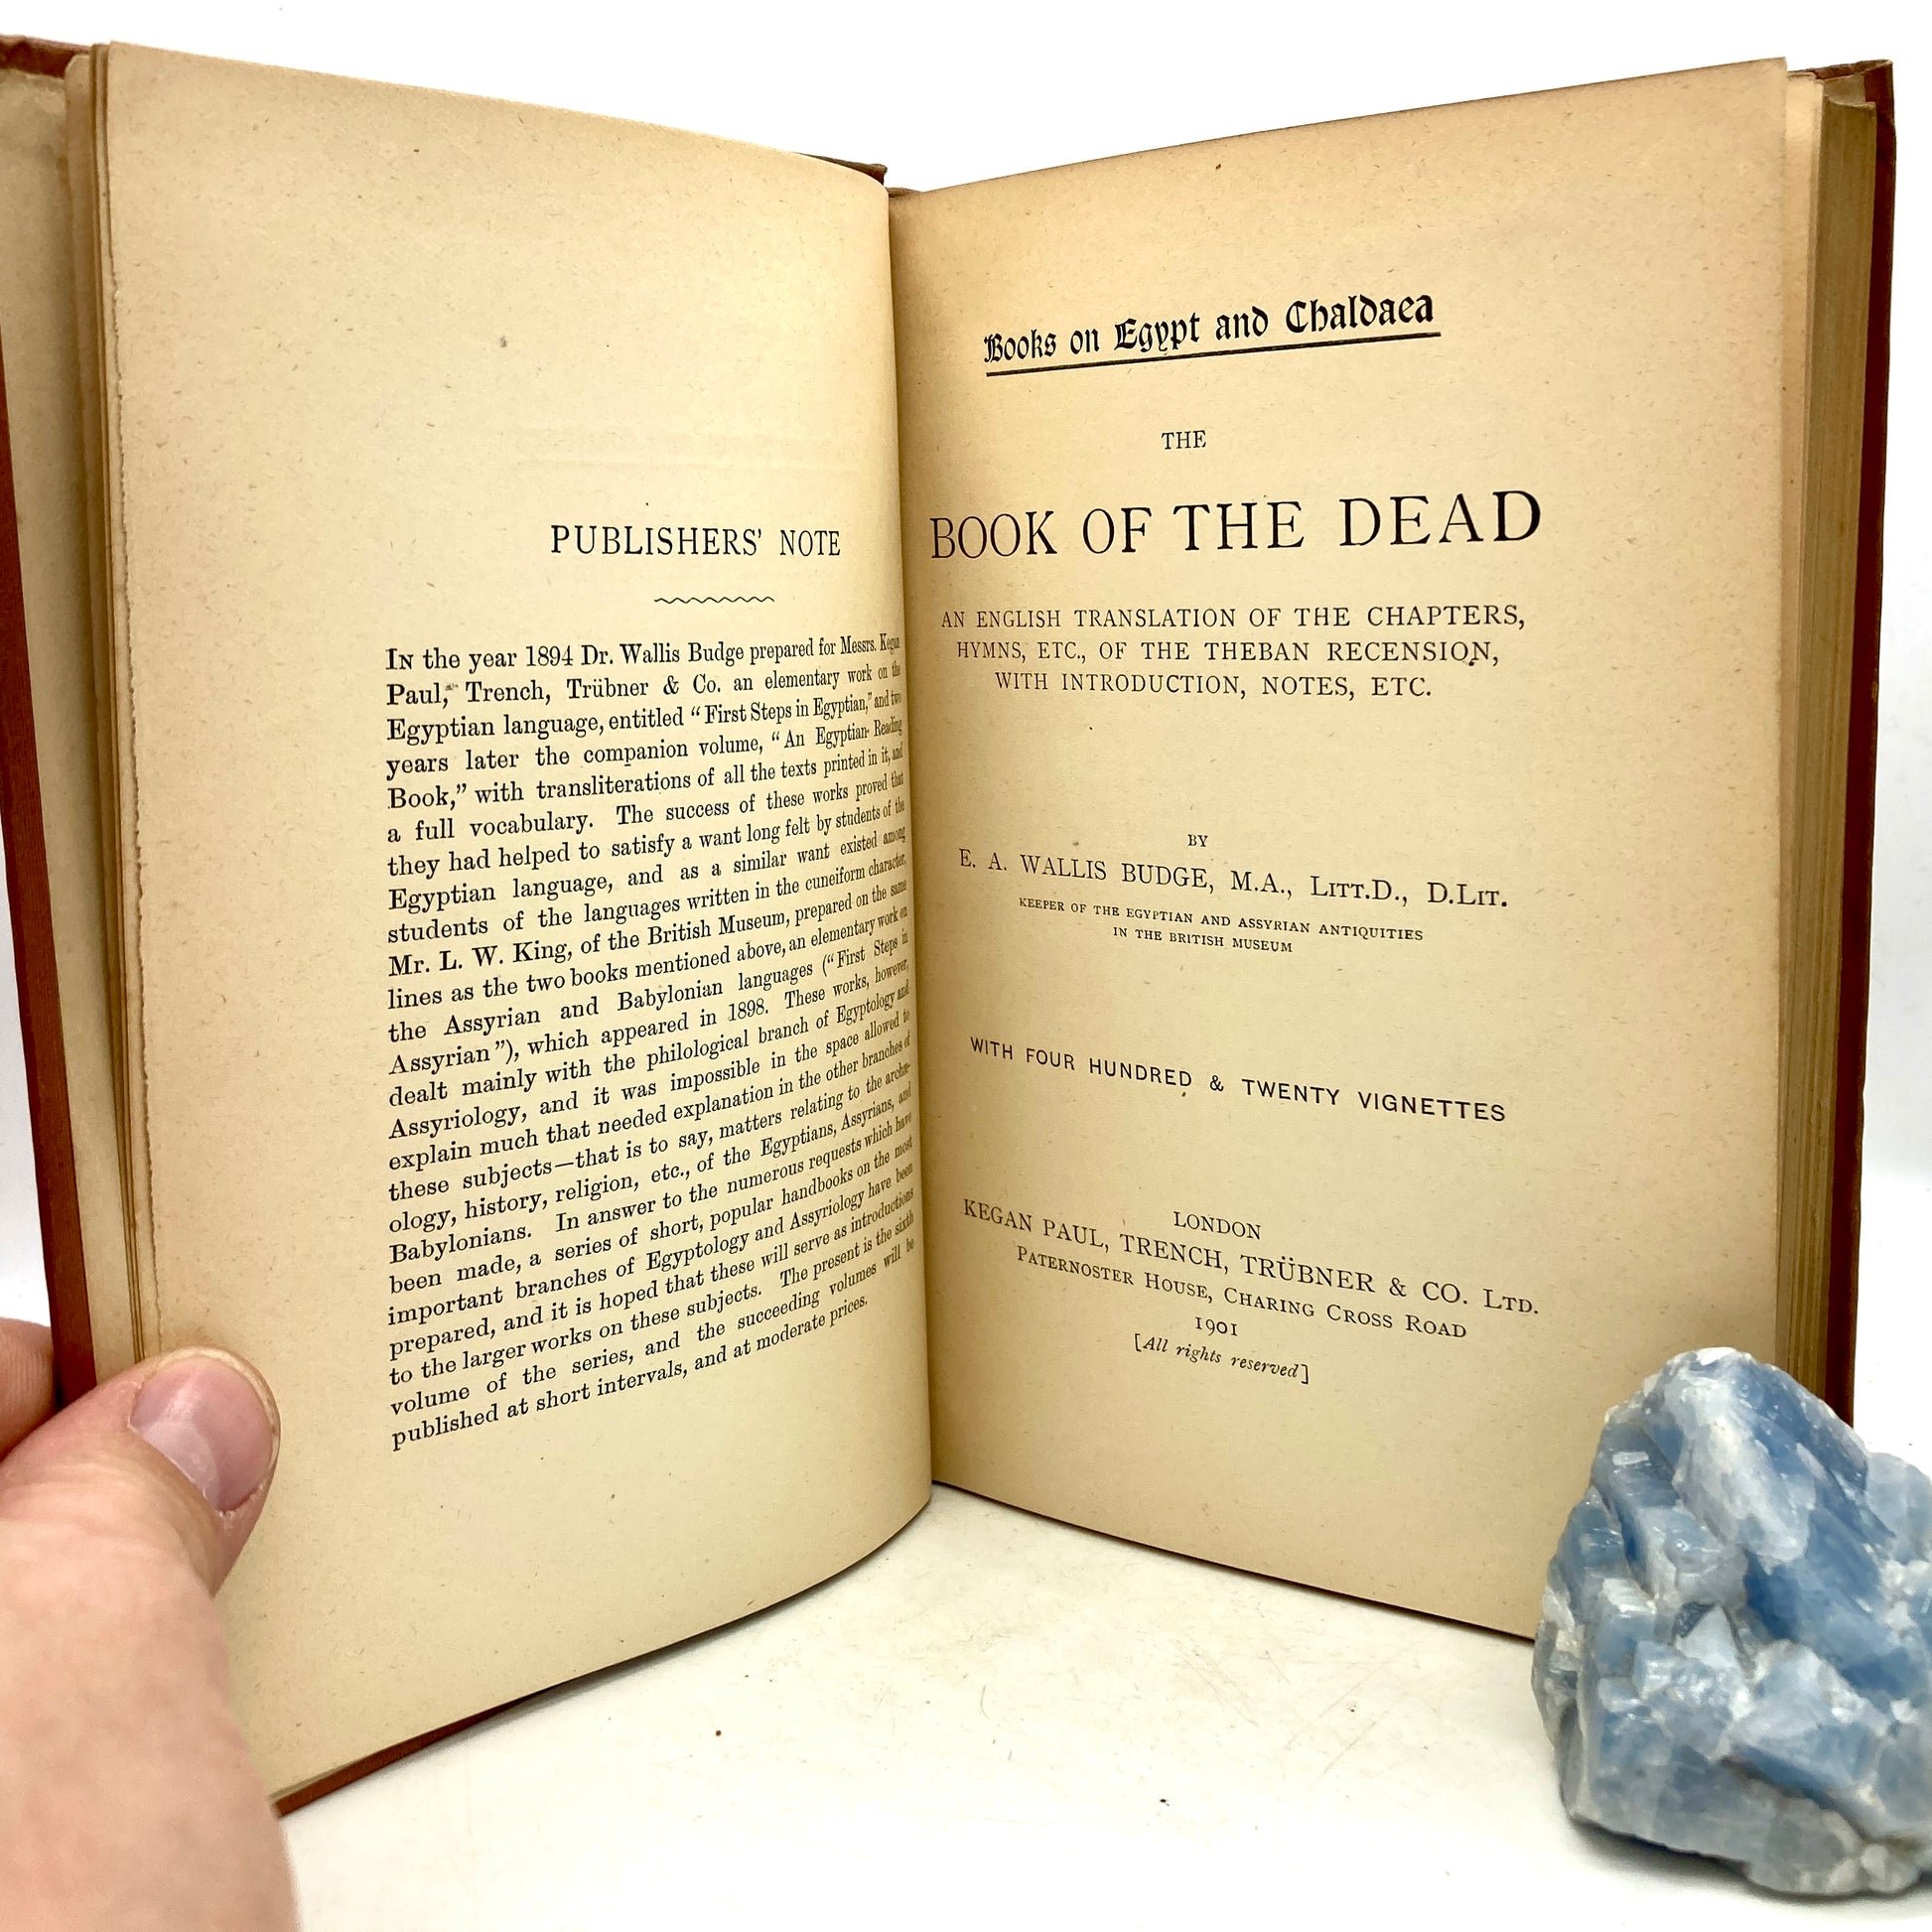 BUDGE, E.A. Wallis "The Book of the Dead" [Kegan Paul, Trench, Trubner & Co, 1901] - Buzz Bookstore